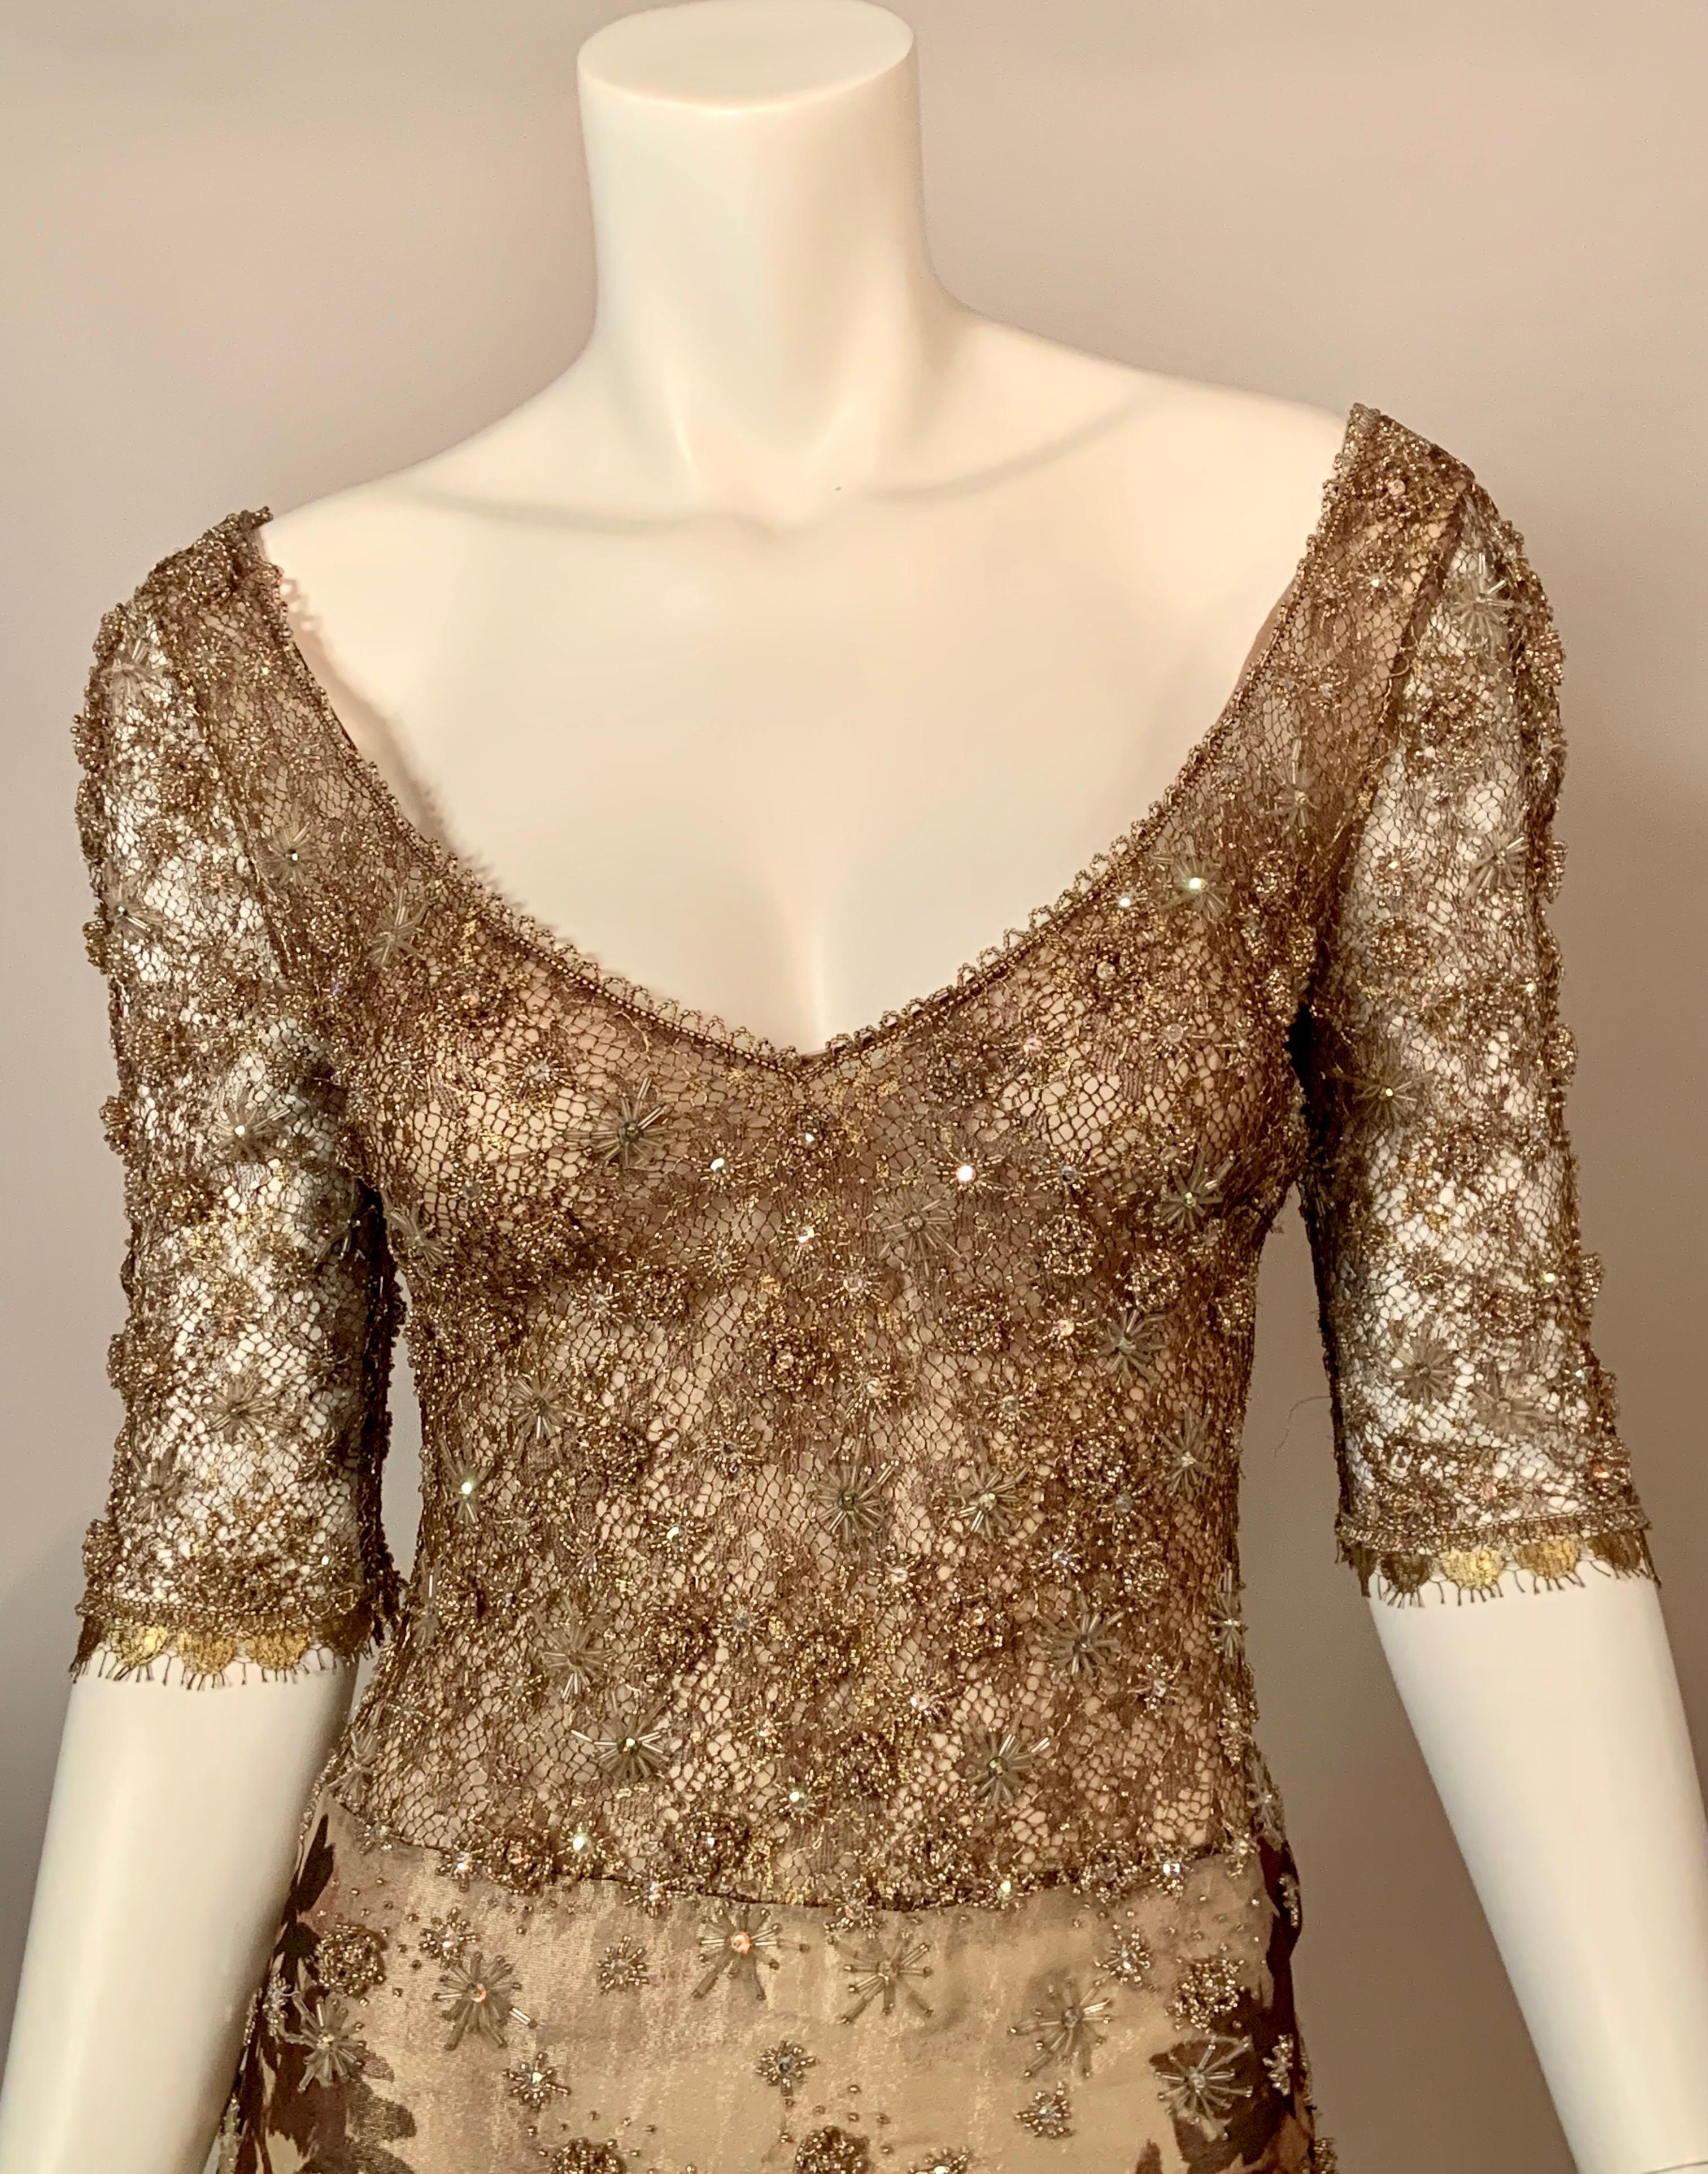 The top of this glamorous dress from Badgley Mischka has starburst beadwork on gold lace. The neckline is edged with caviar beads and the sleeves are trimmed with caviar beads and scalloped gold lace. The long skirt is partially beaded over a fern